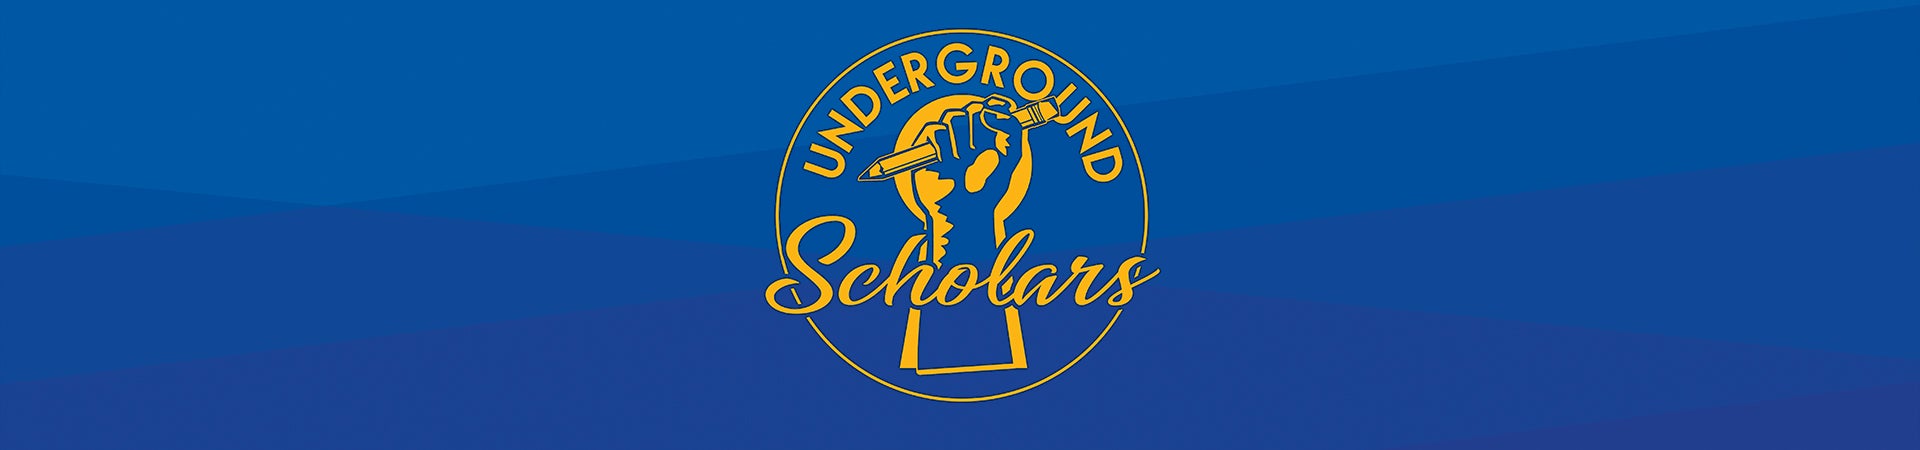 UCR UCI Logo - fit w/ pencil and underground scholars text